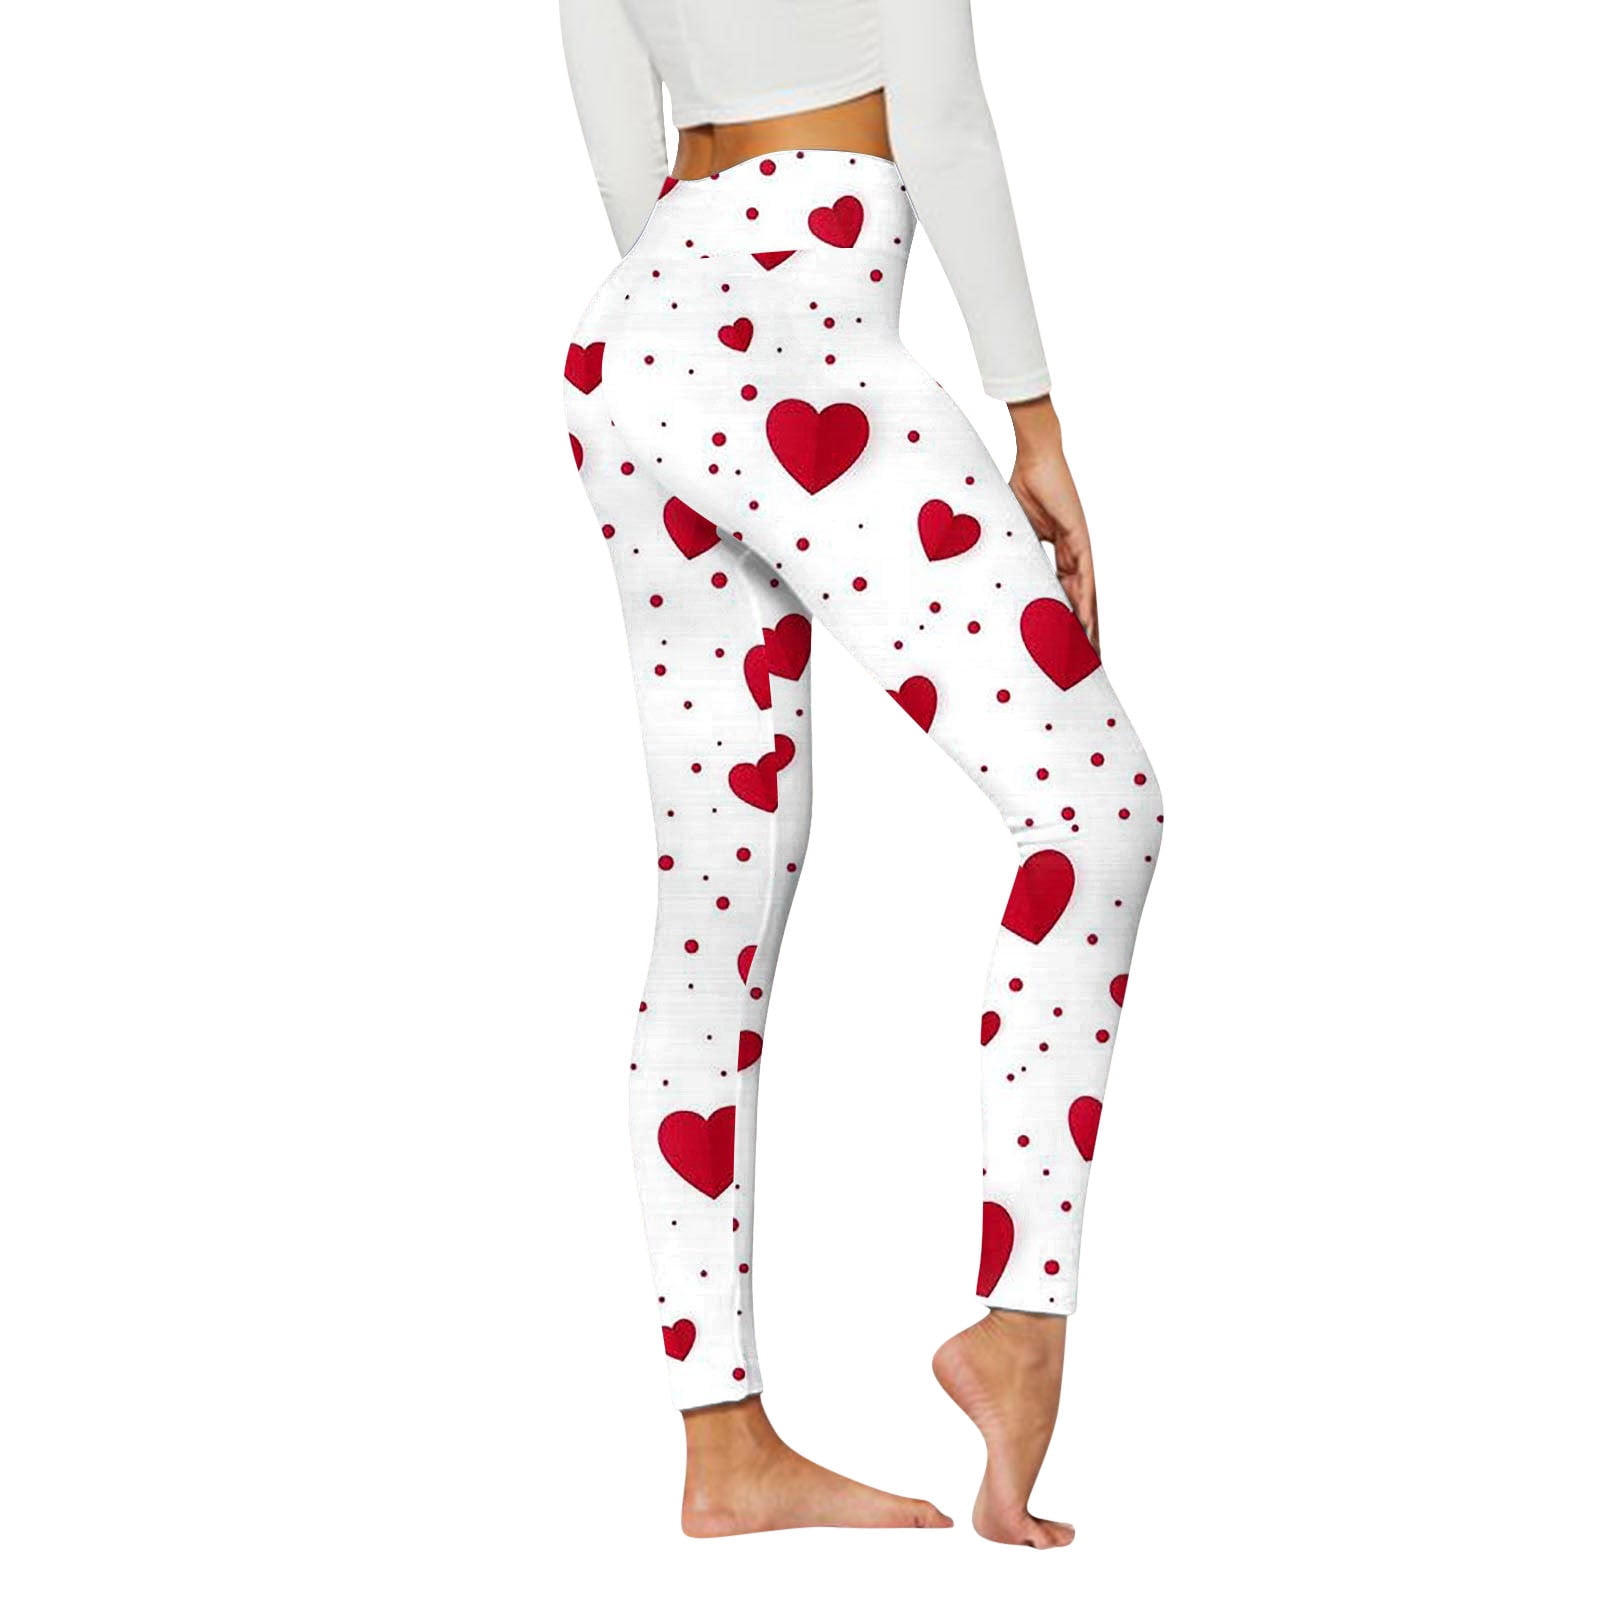 Ketyyh-chn99 Valentines Day Leggings for Women High Waist Pack Womens Leggings  Valentine Day Cute Print Casual Comfortable Home Leggings Boot 